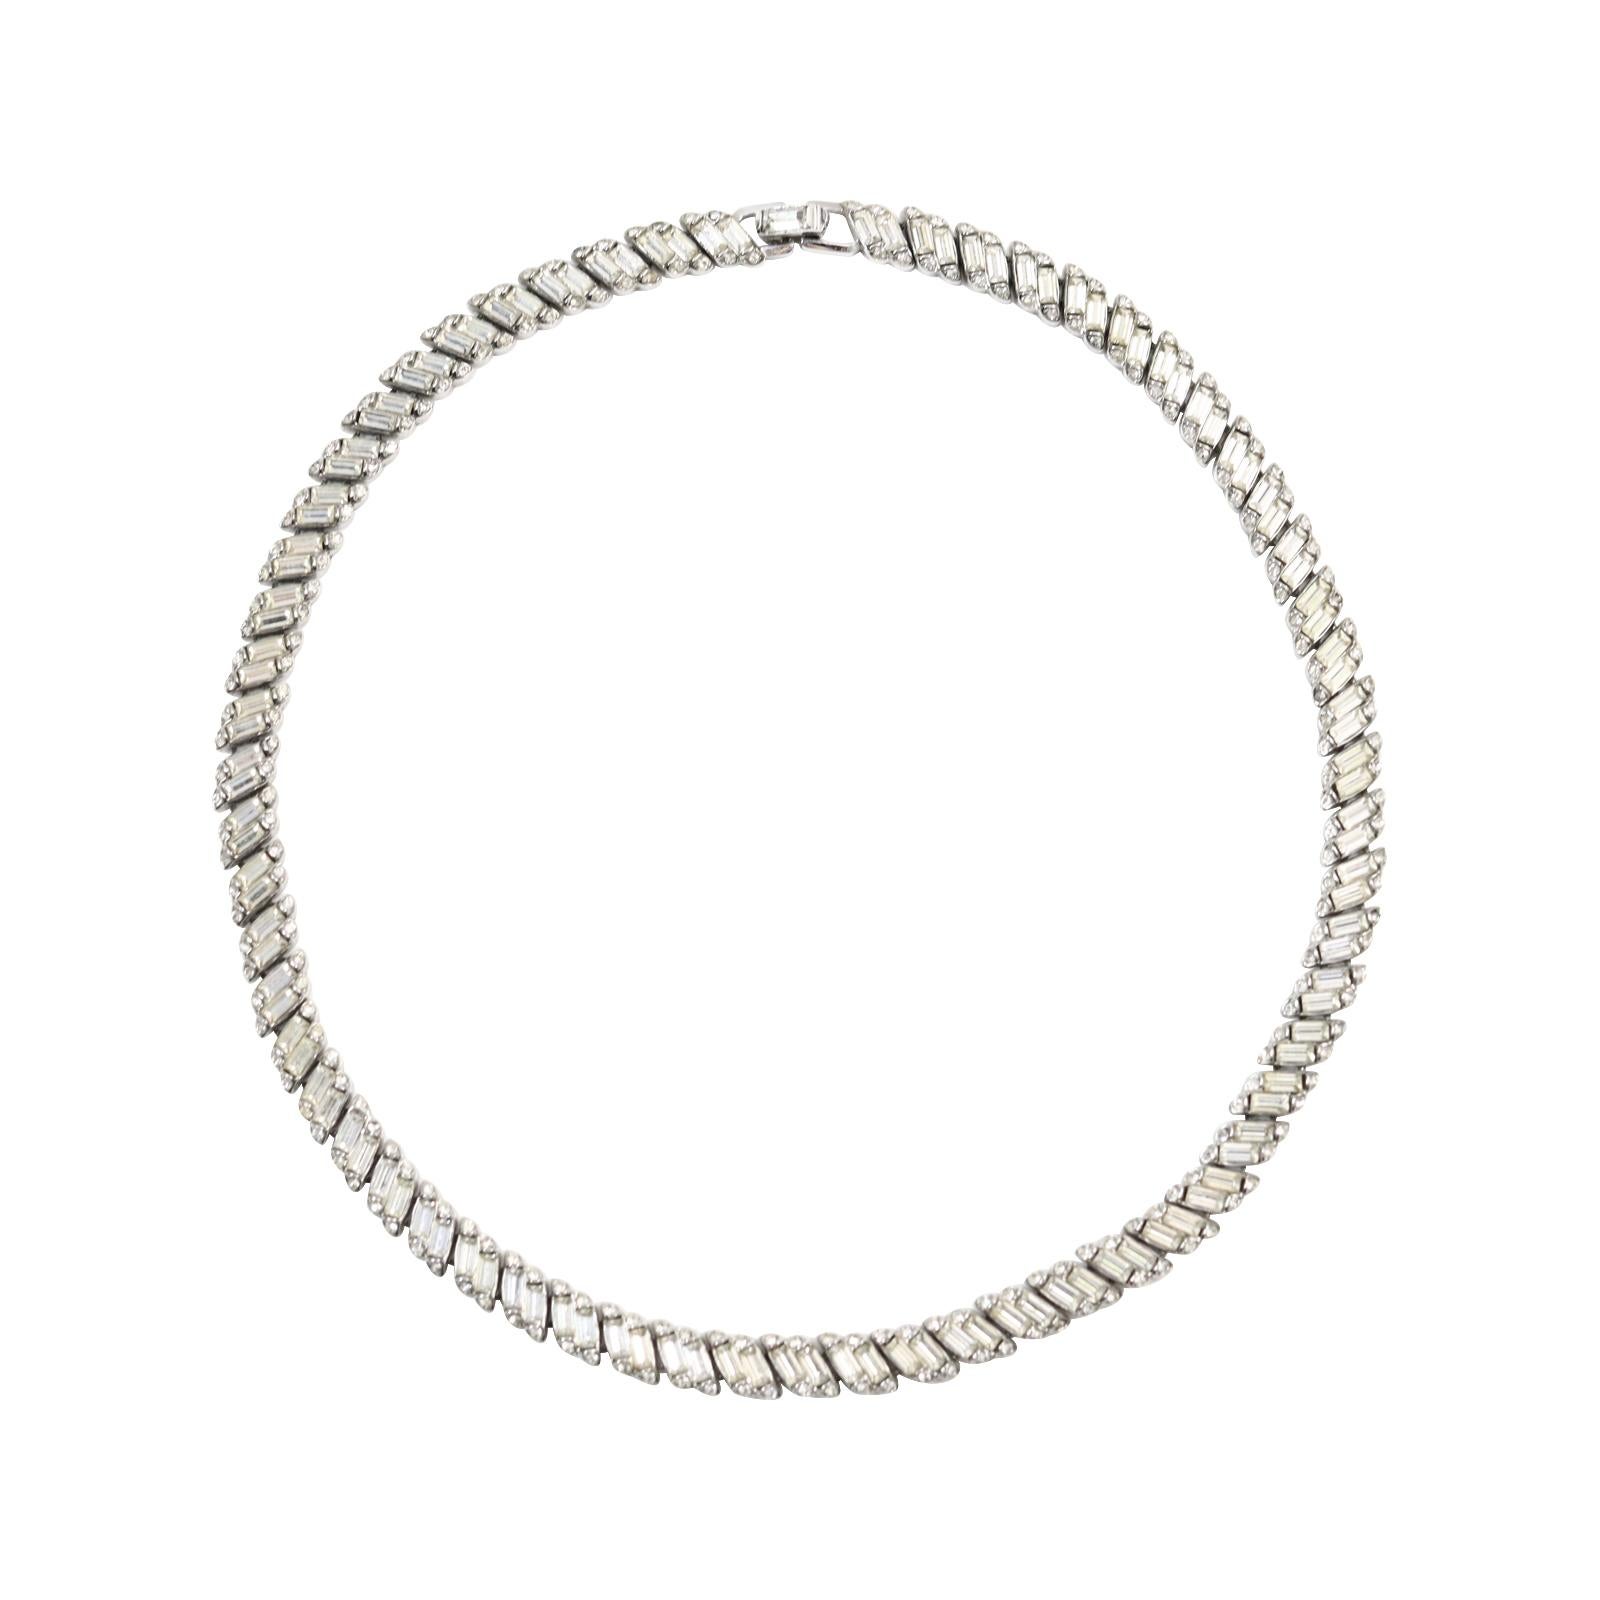 Vintage Trifari Baguette Tennis Necklace Choker Circa 1960s. The dates of this necklace make it between 1955-1969. This looks like a very expensive classic necklace.  It is all prong set and wow does it deliver. In great Shape.  You need nothing